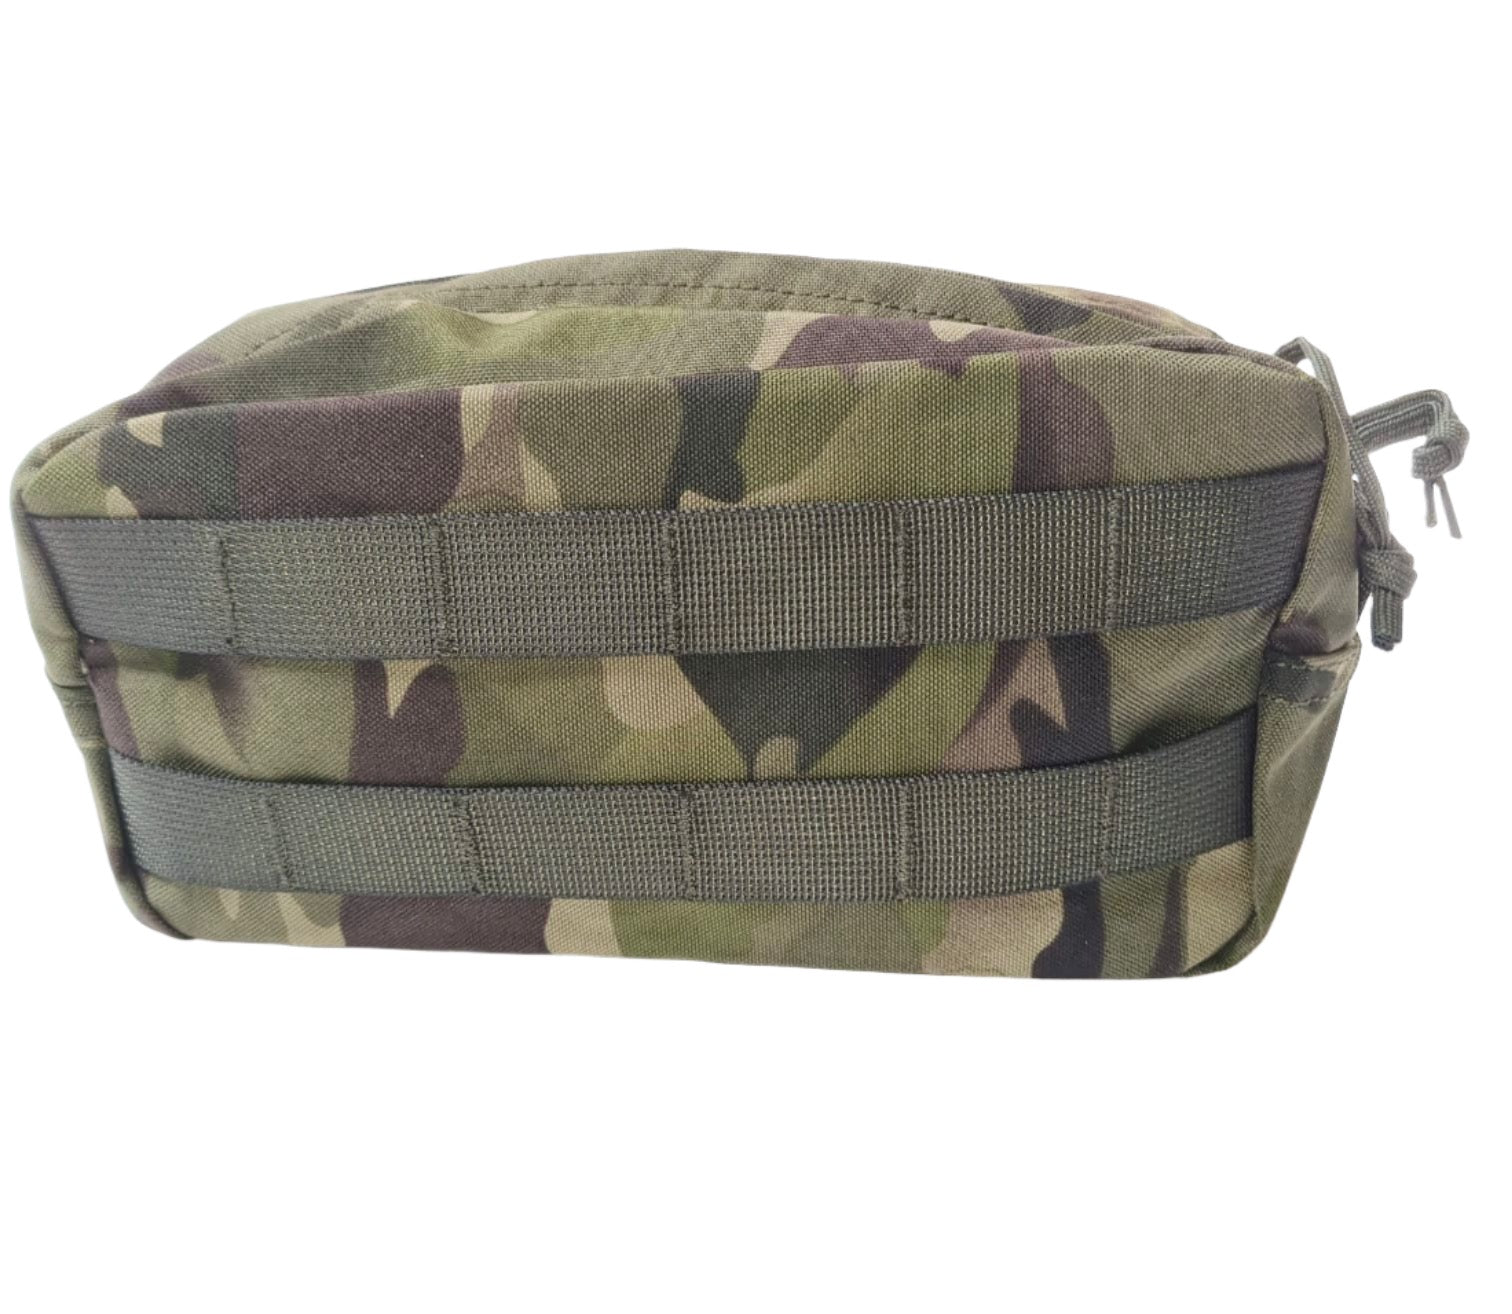 SHE-1421 HORIZONTAL UTILITY POUCH UTP TEMPERATE